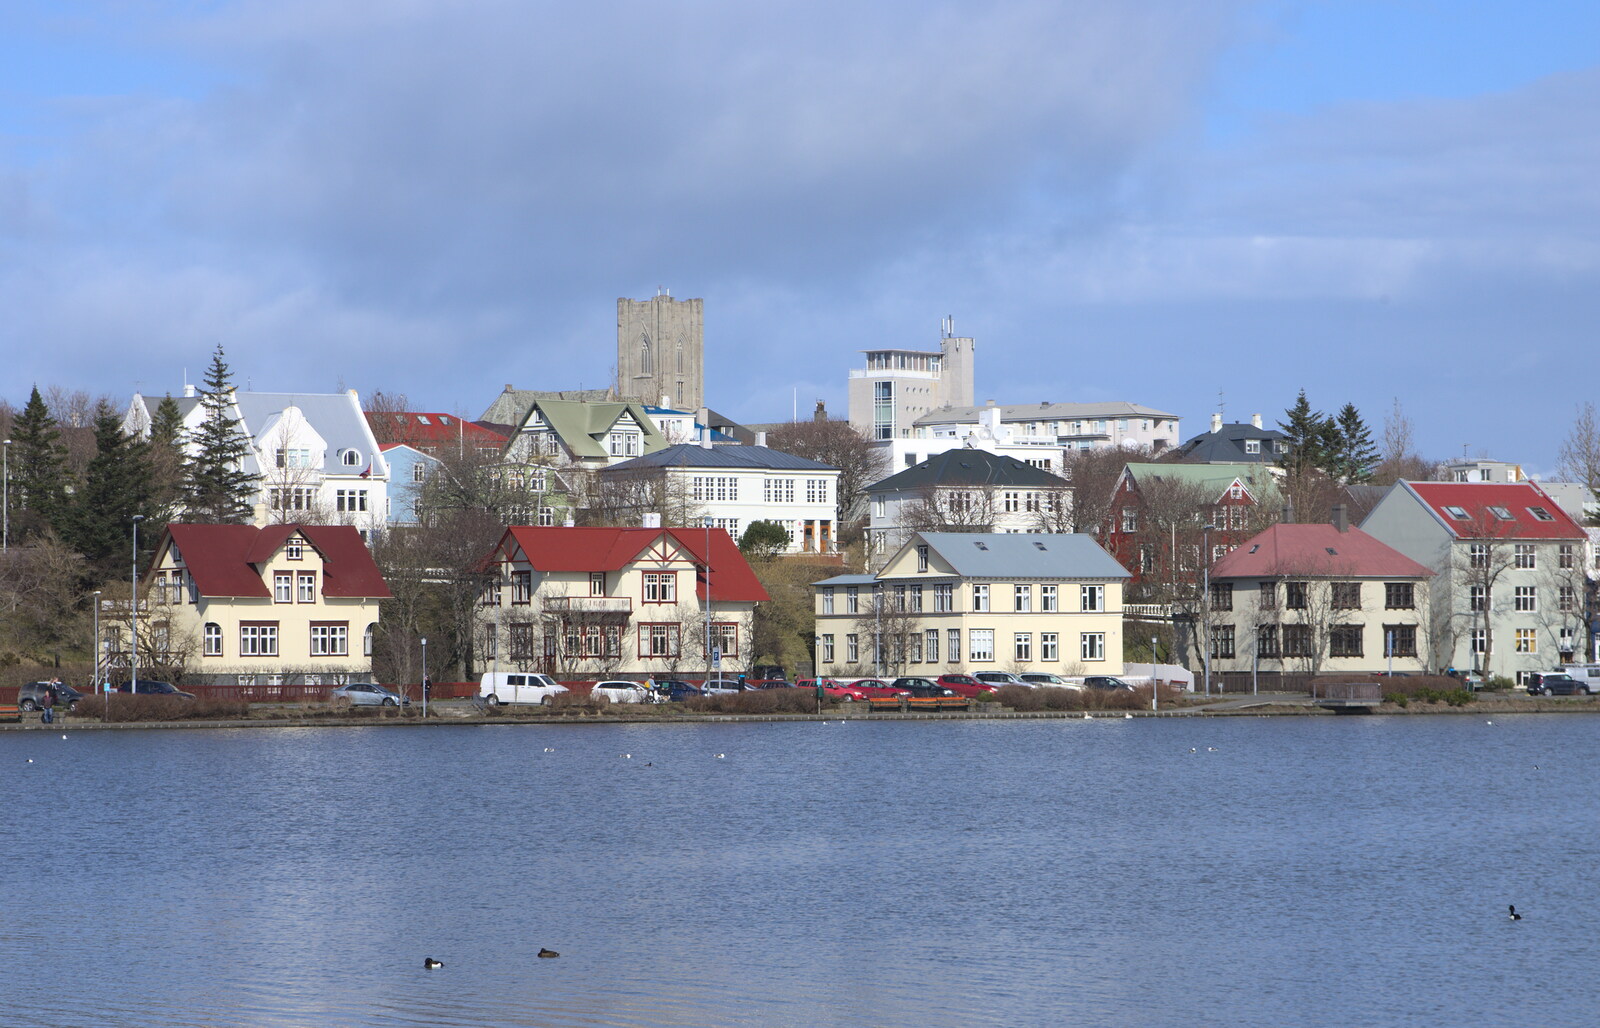 Houses round a lake from Hallgrímskirkja Cathedral and Whale Watching, Reykjavik - 21st April 2017